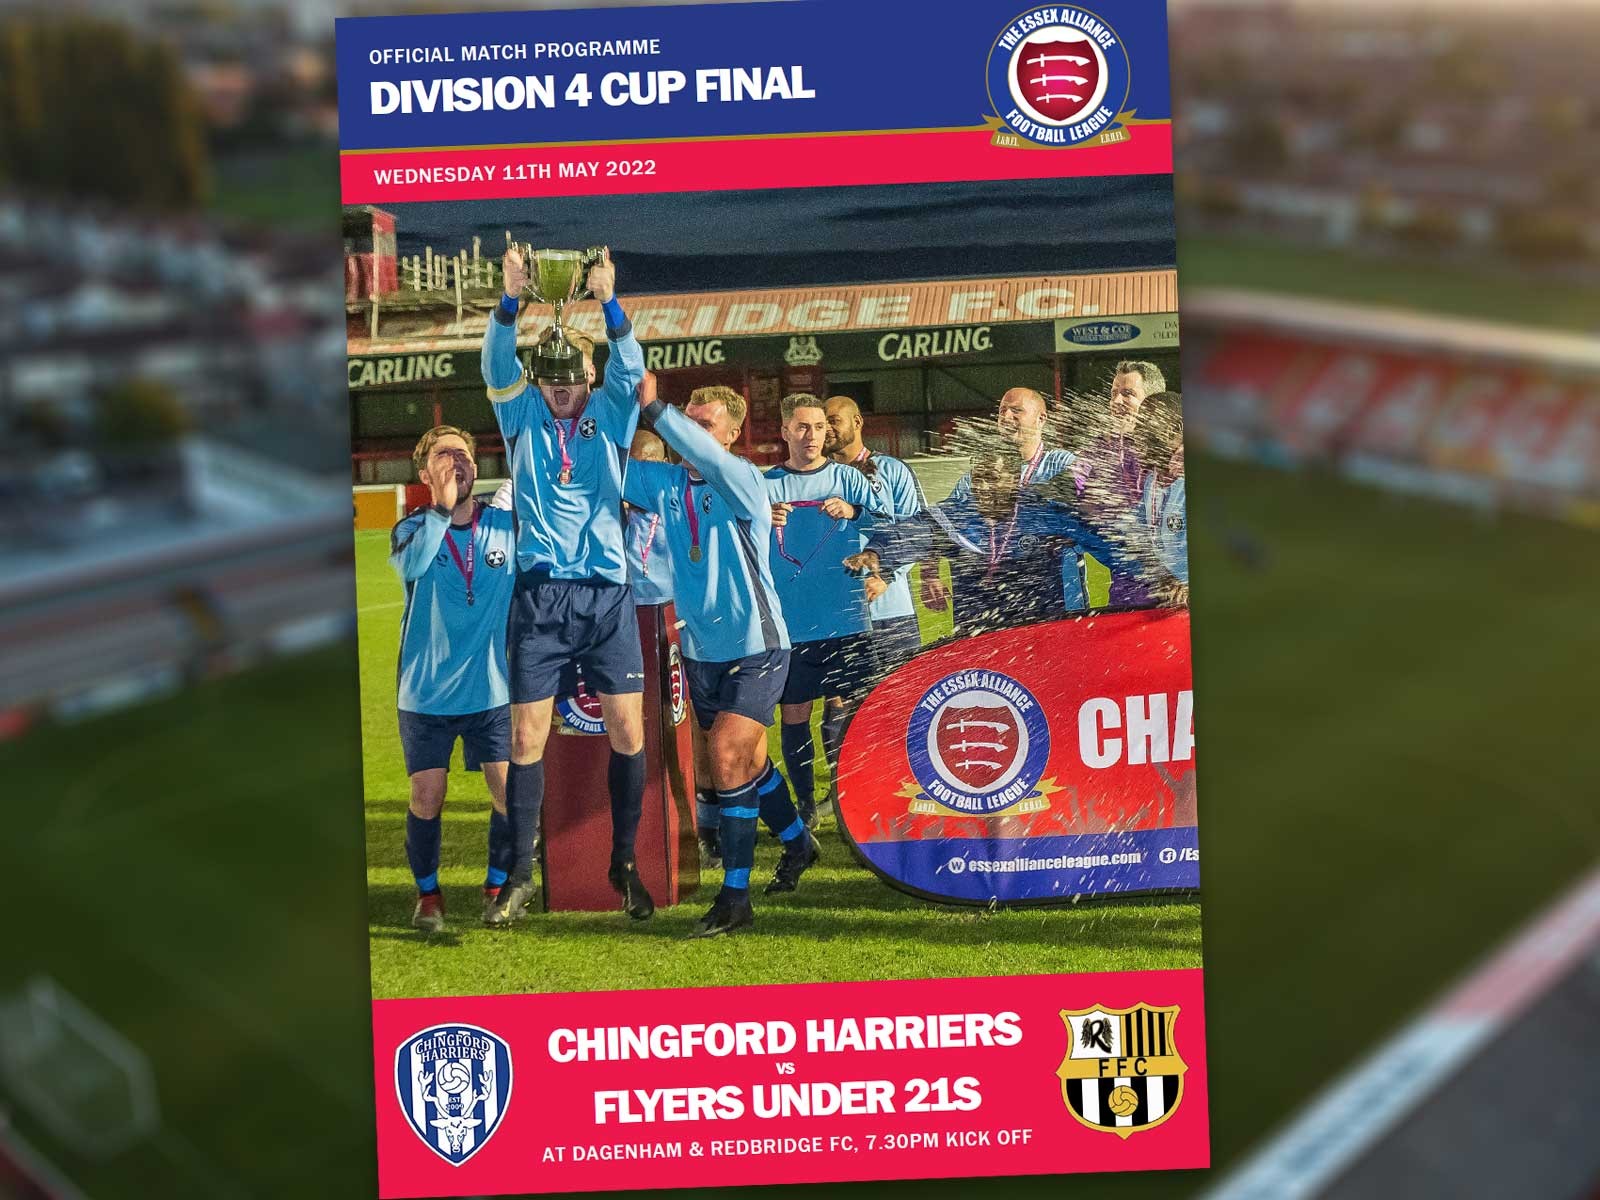 Chingford Harriers and Flyers Under 21s kick off cup final season on Wednesday night